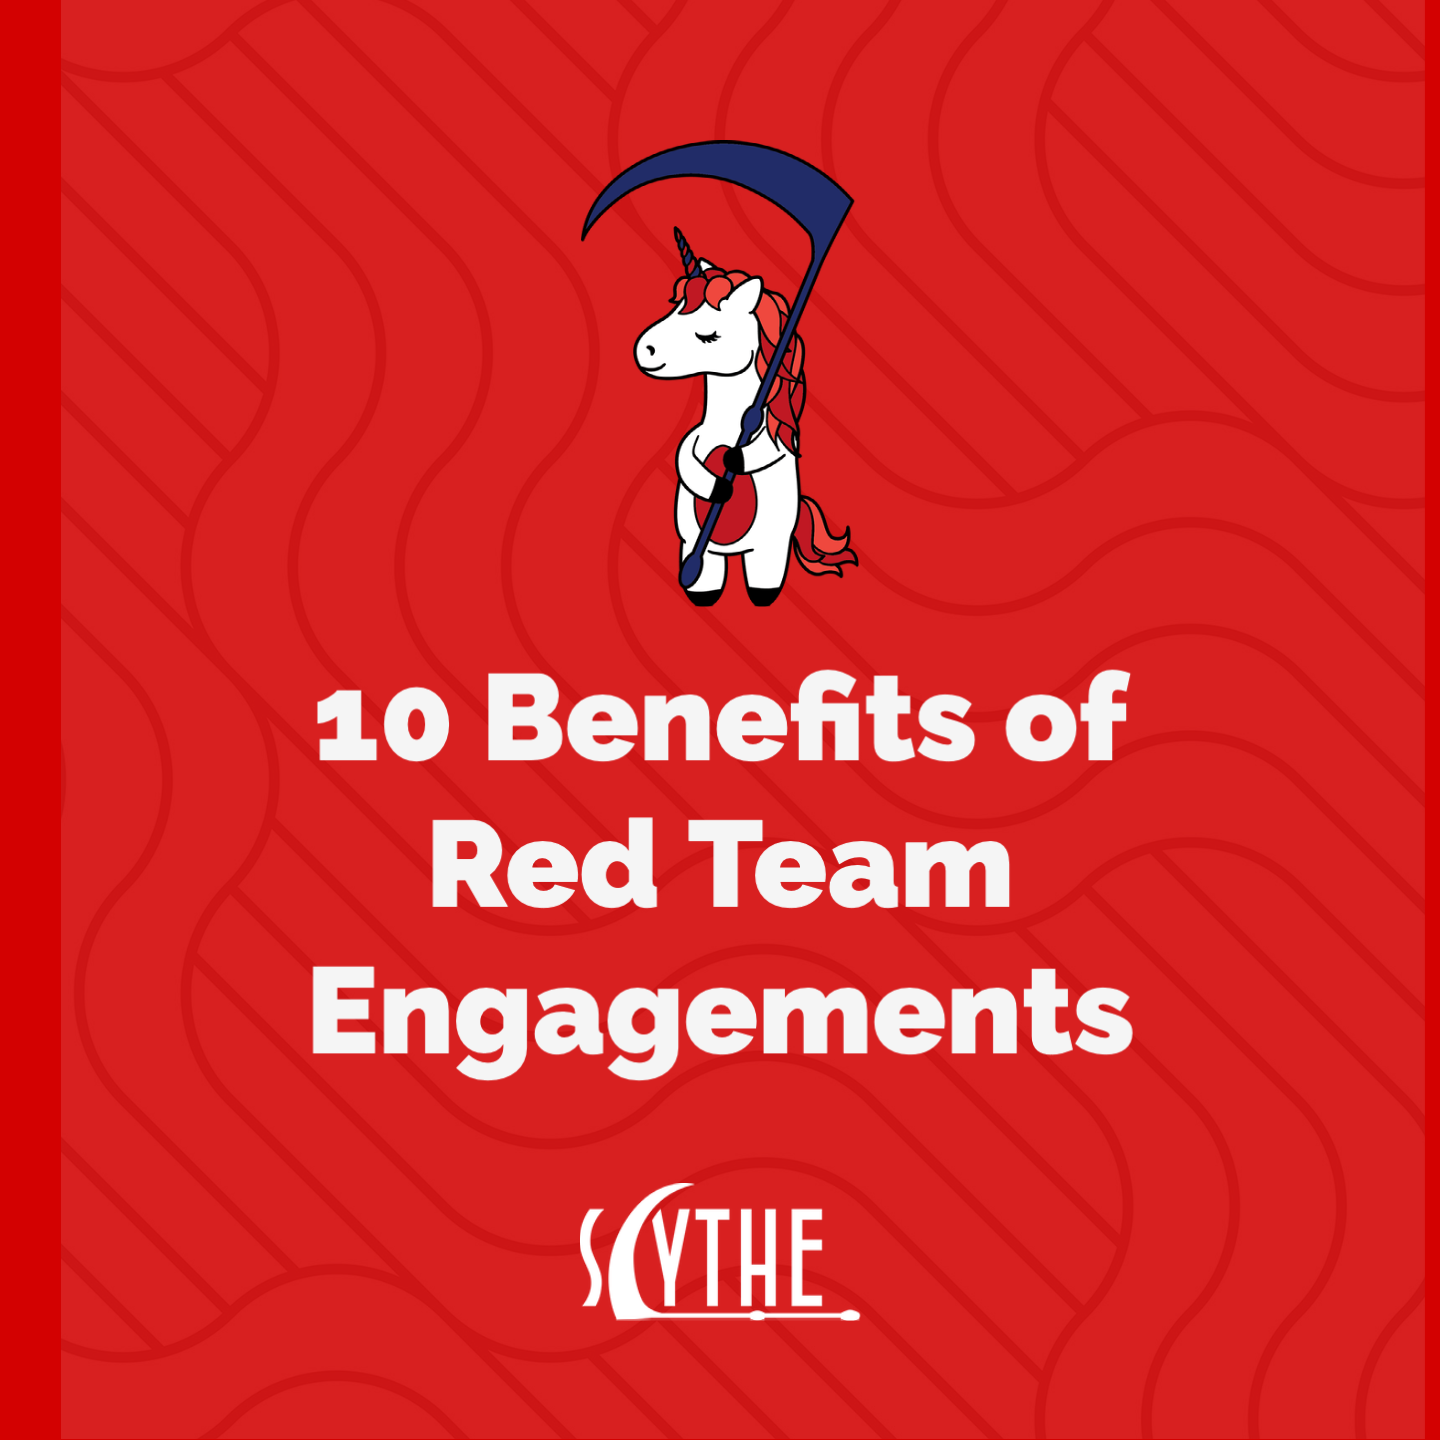 10 Benefits of Red Team Engagements